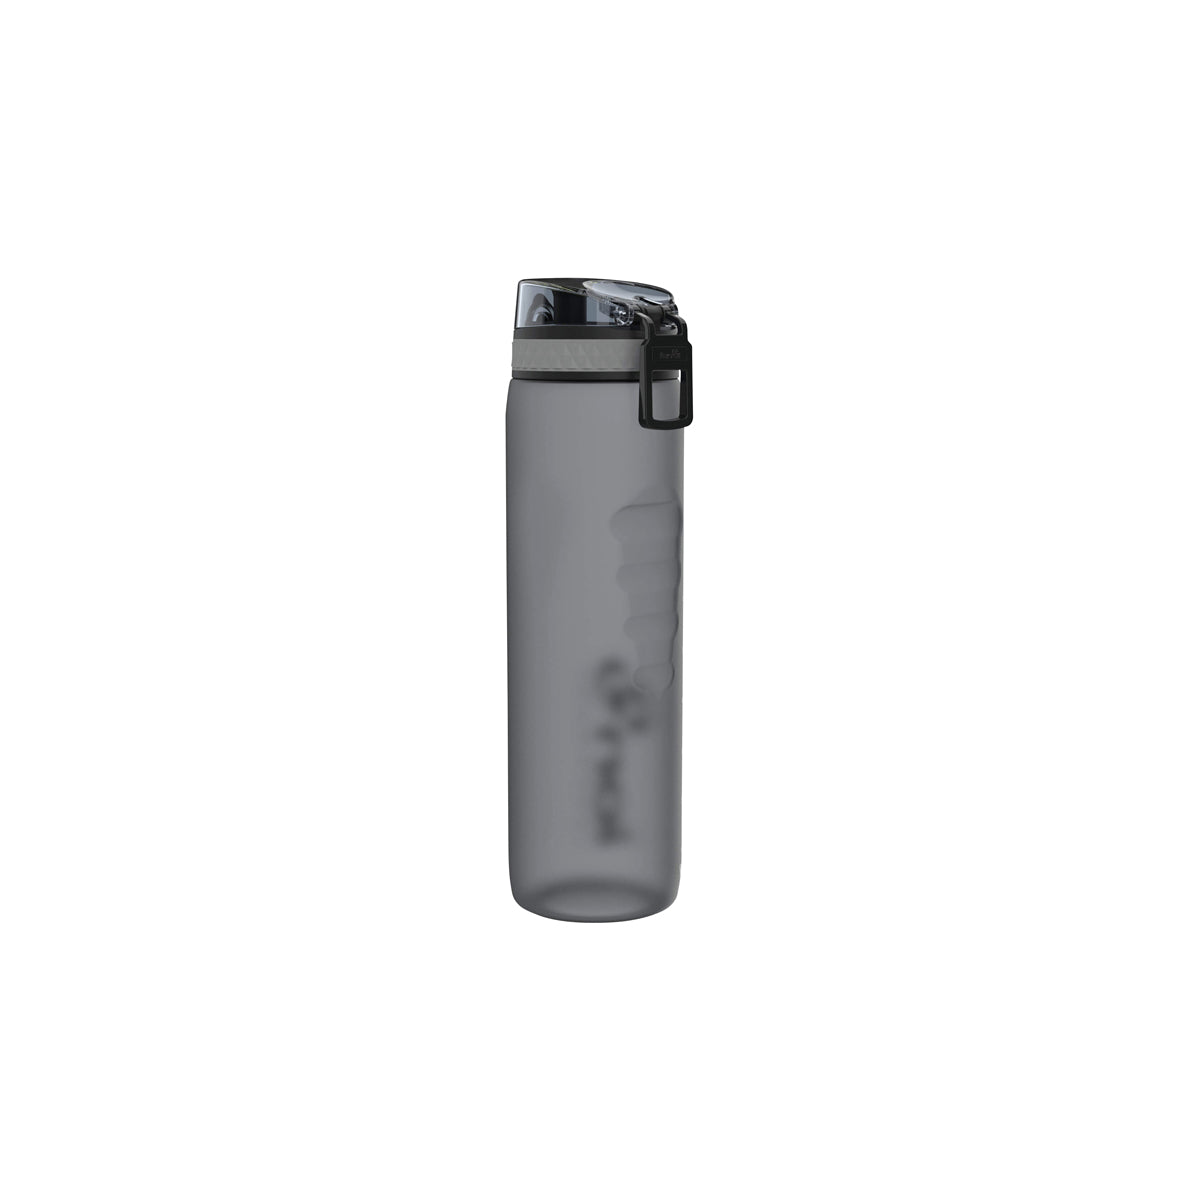 IONI81000FGRY ION8 Quench Water Bottle Grey 1000ml Tomkin Australia Hospitality Supplies